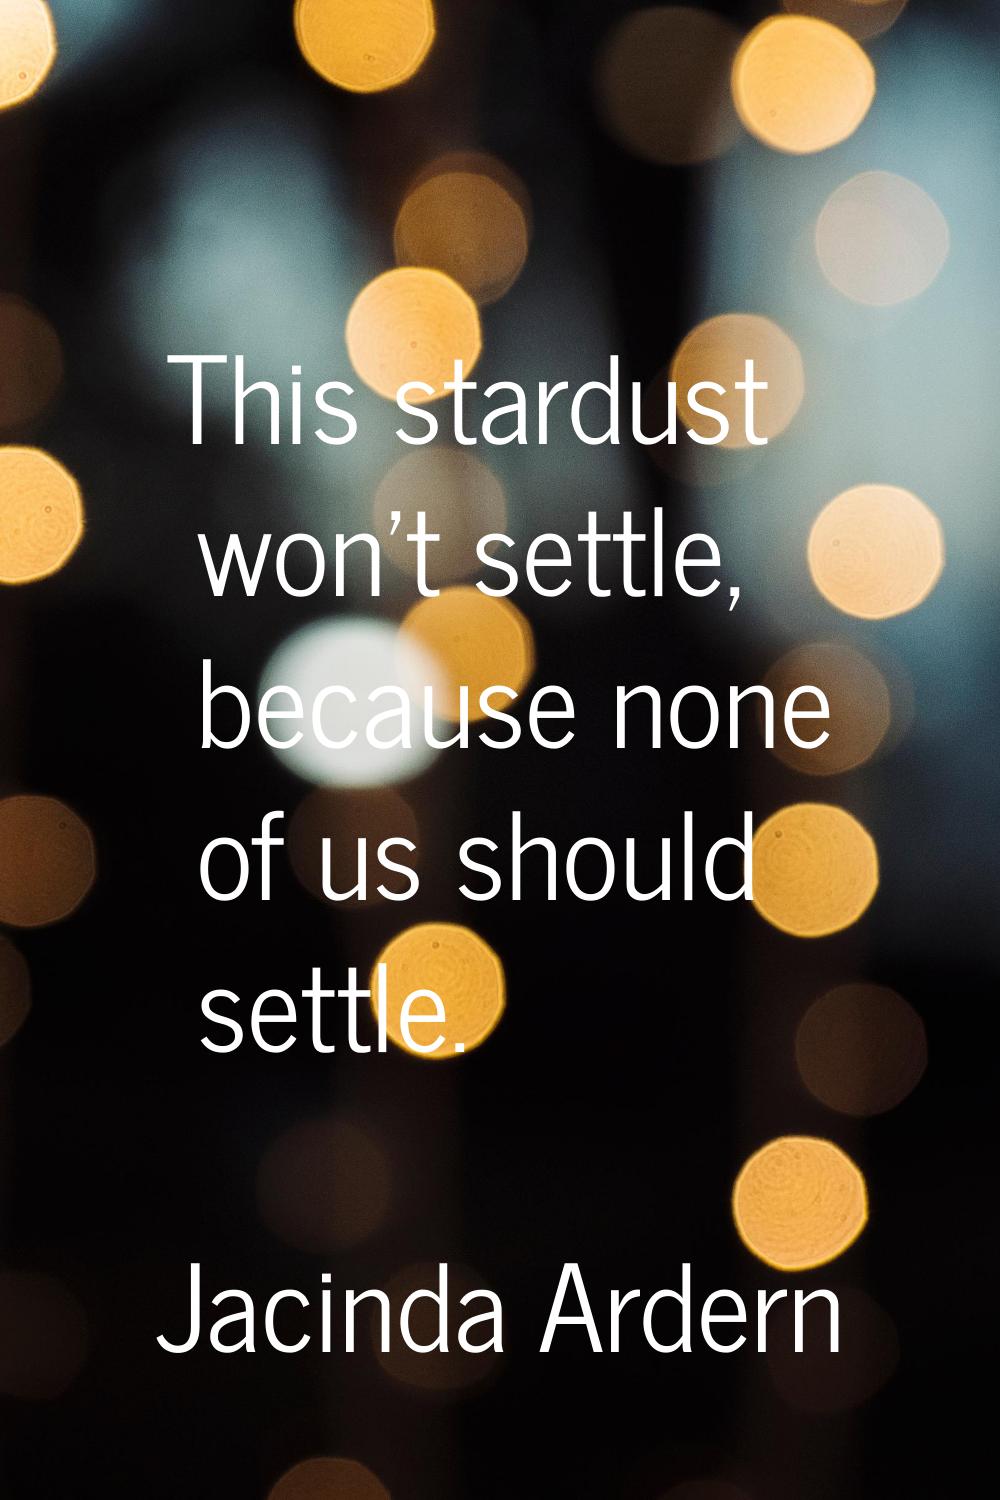 This stardust won't settle, because none of us should settle.